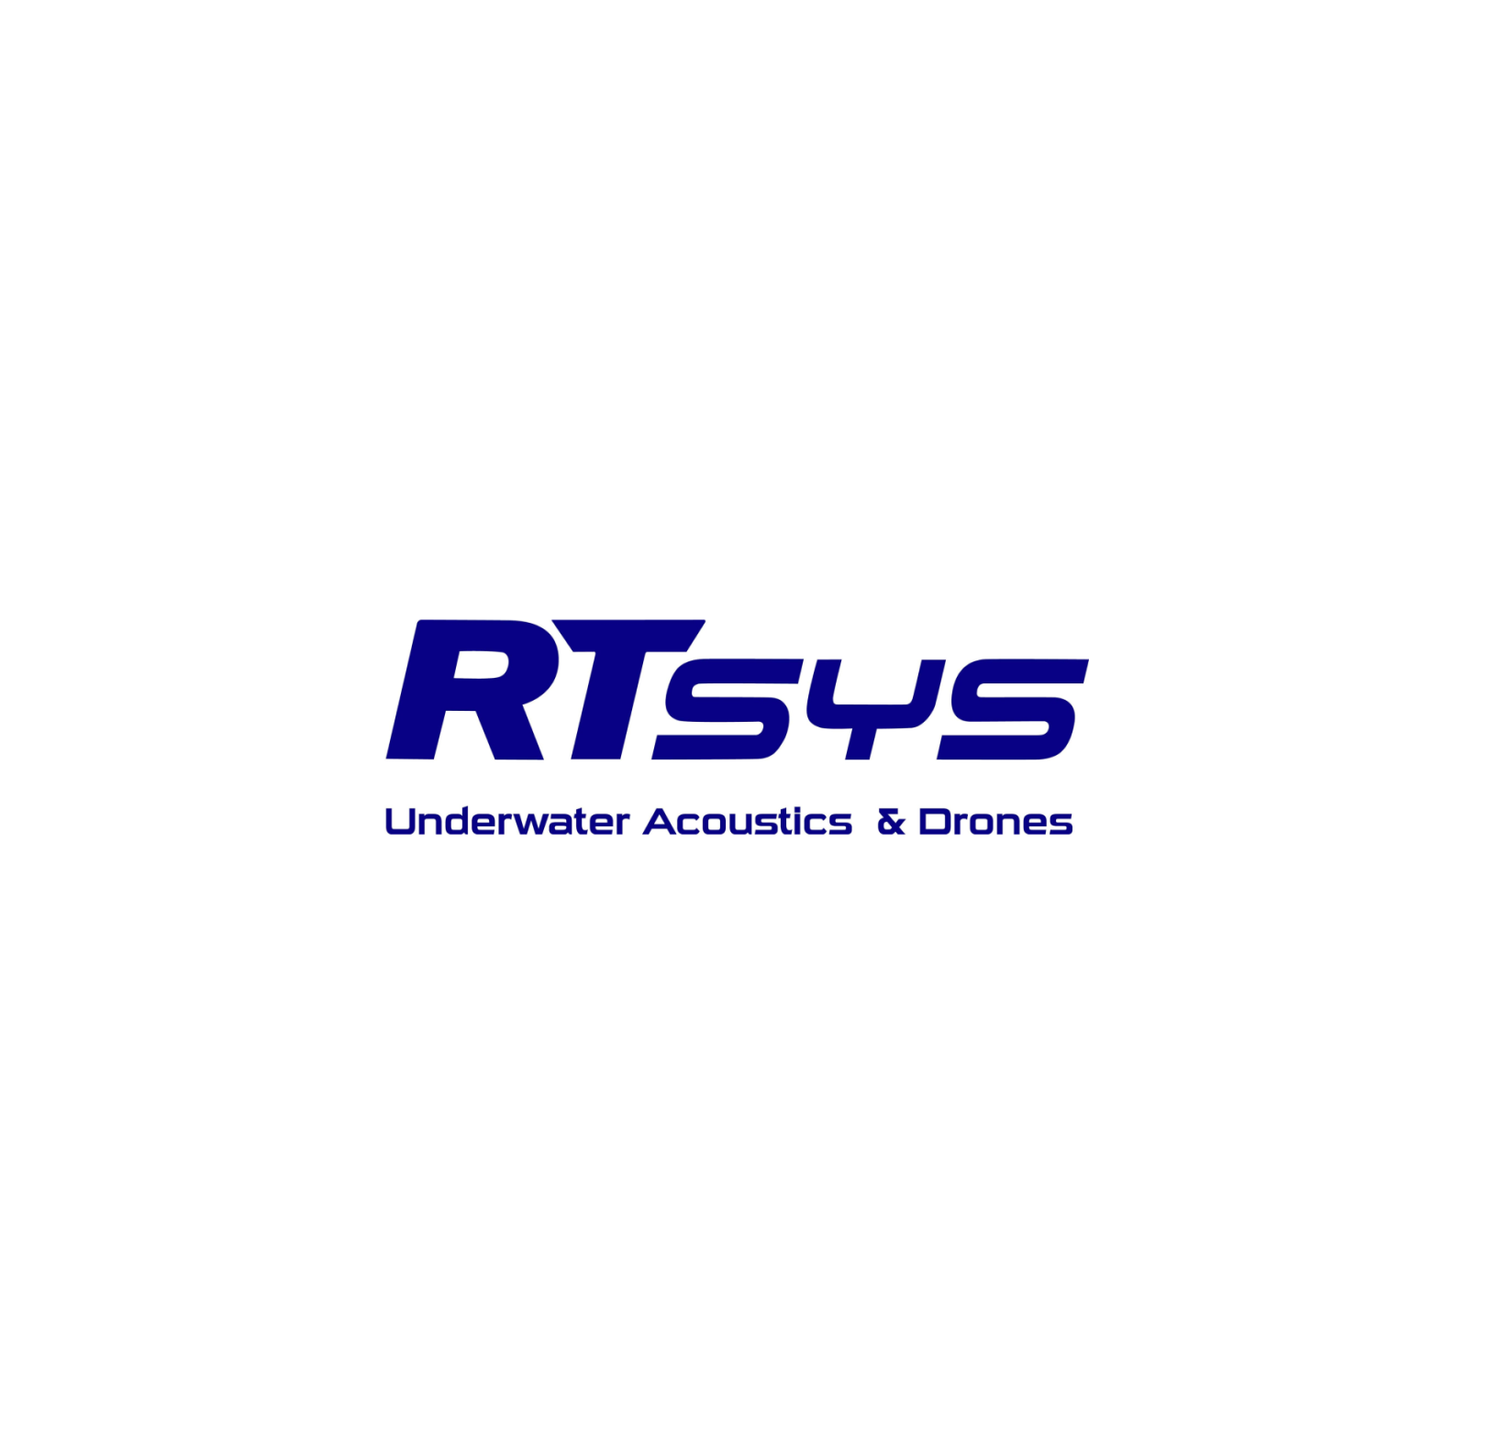 Copoint Supplier of RTSYS Underwater Acoustics Drones